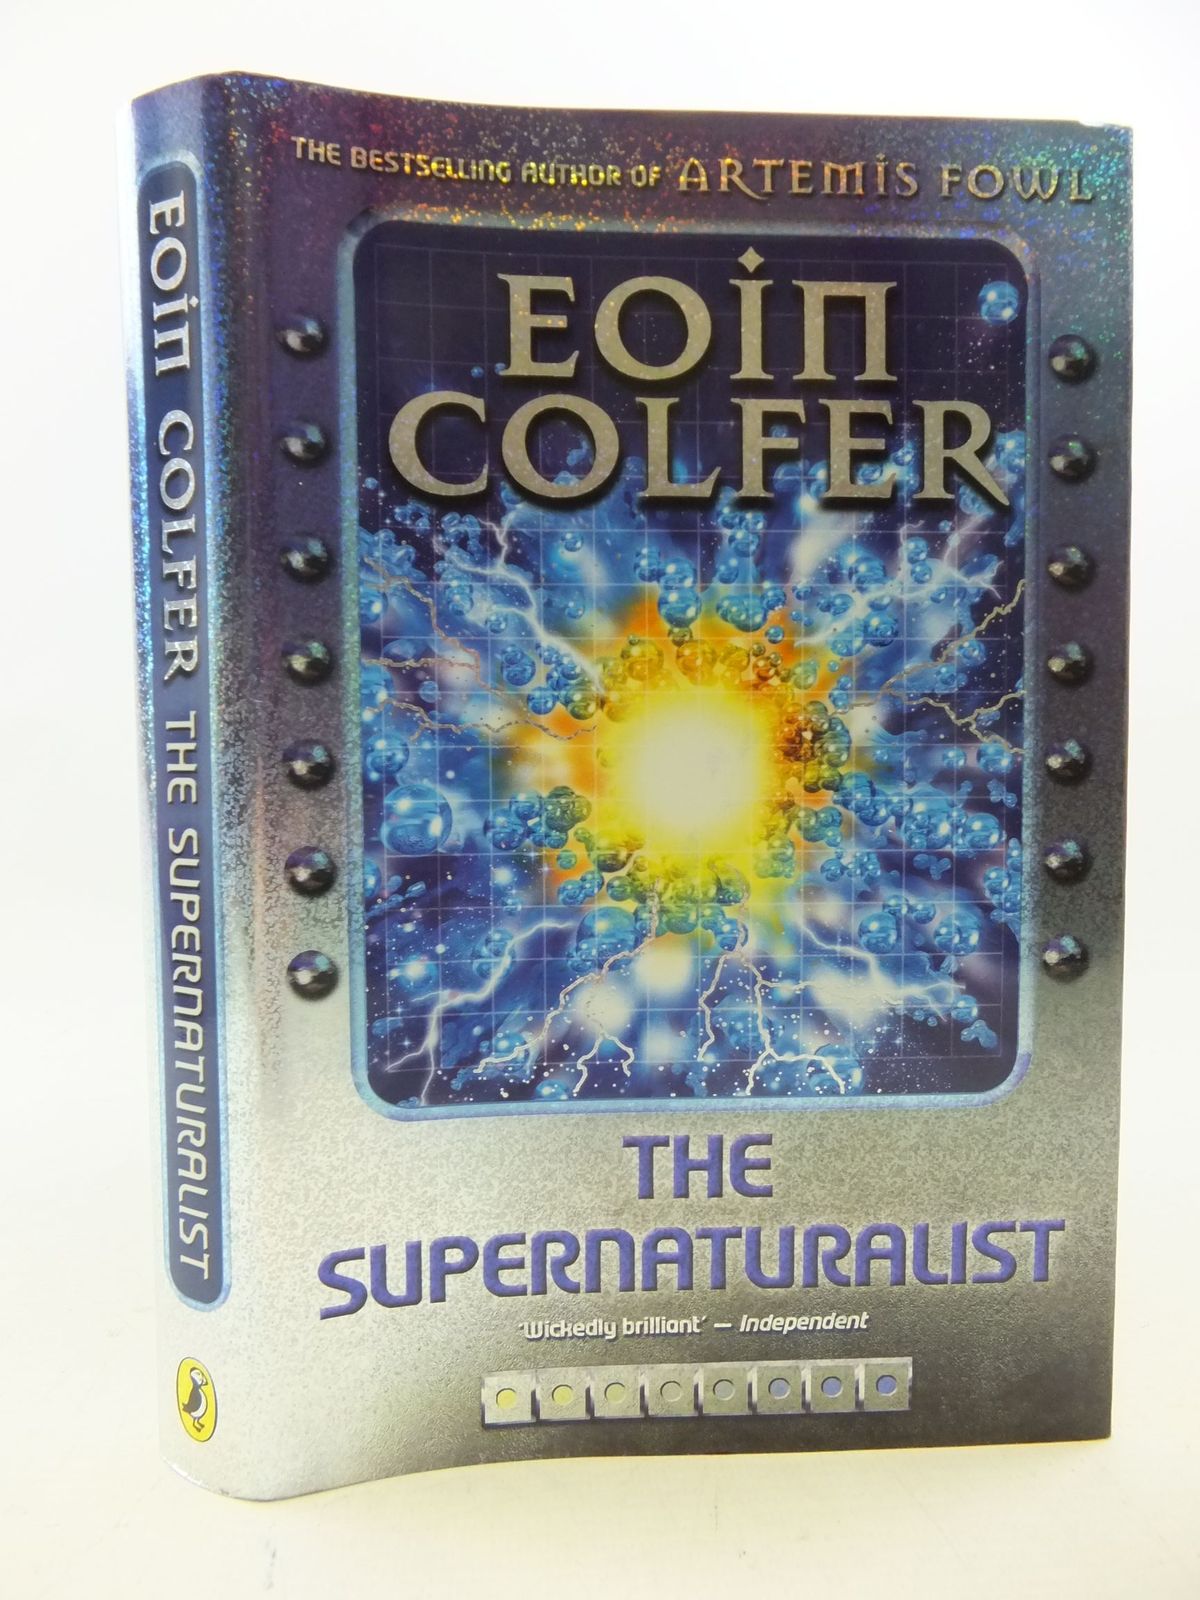 Cover of THE SUPERNATURALIST by Eoin Colfer